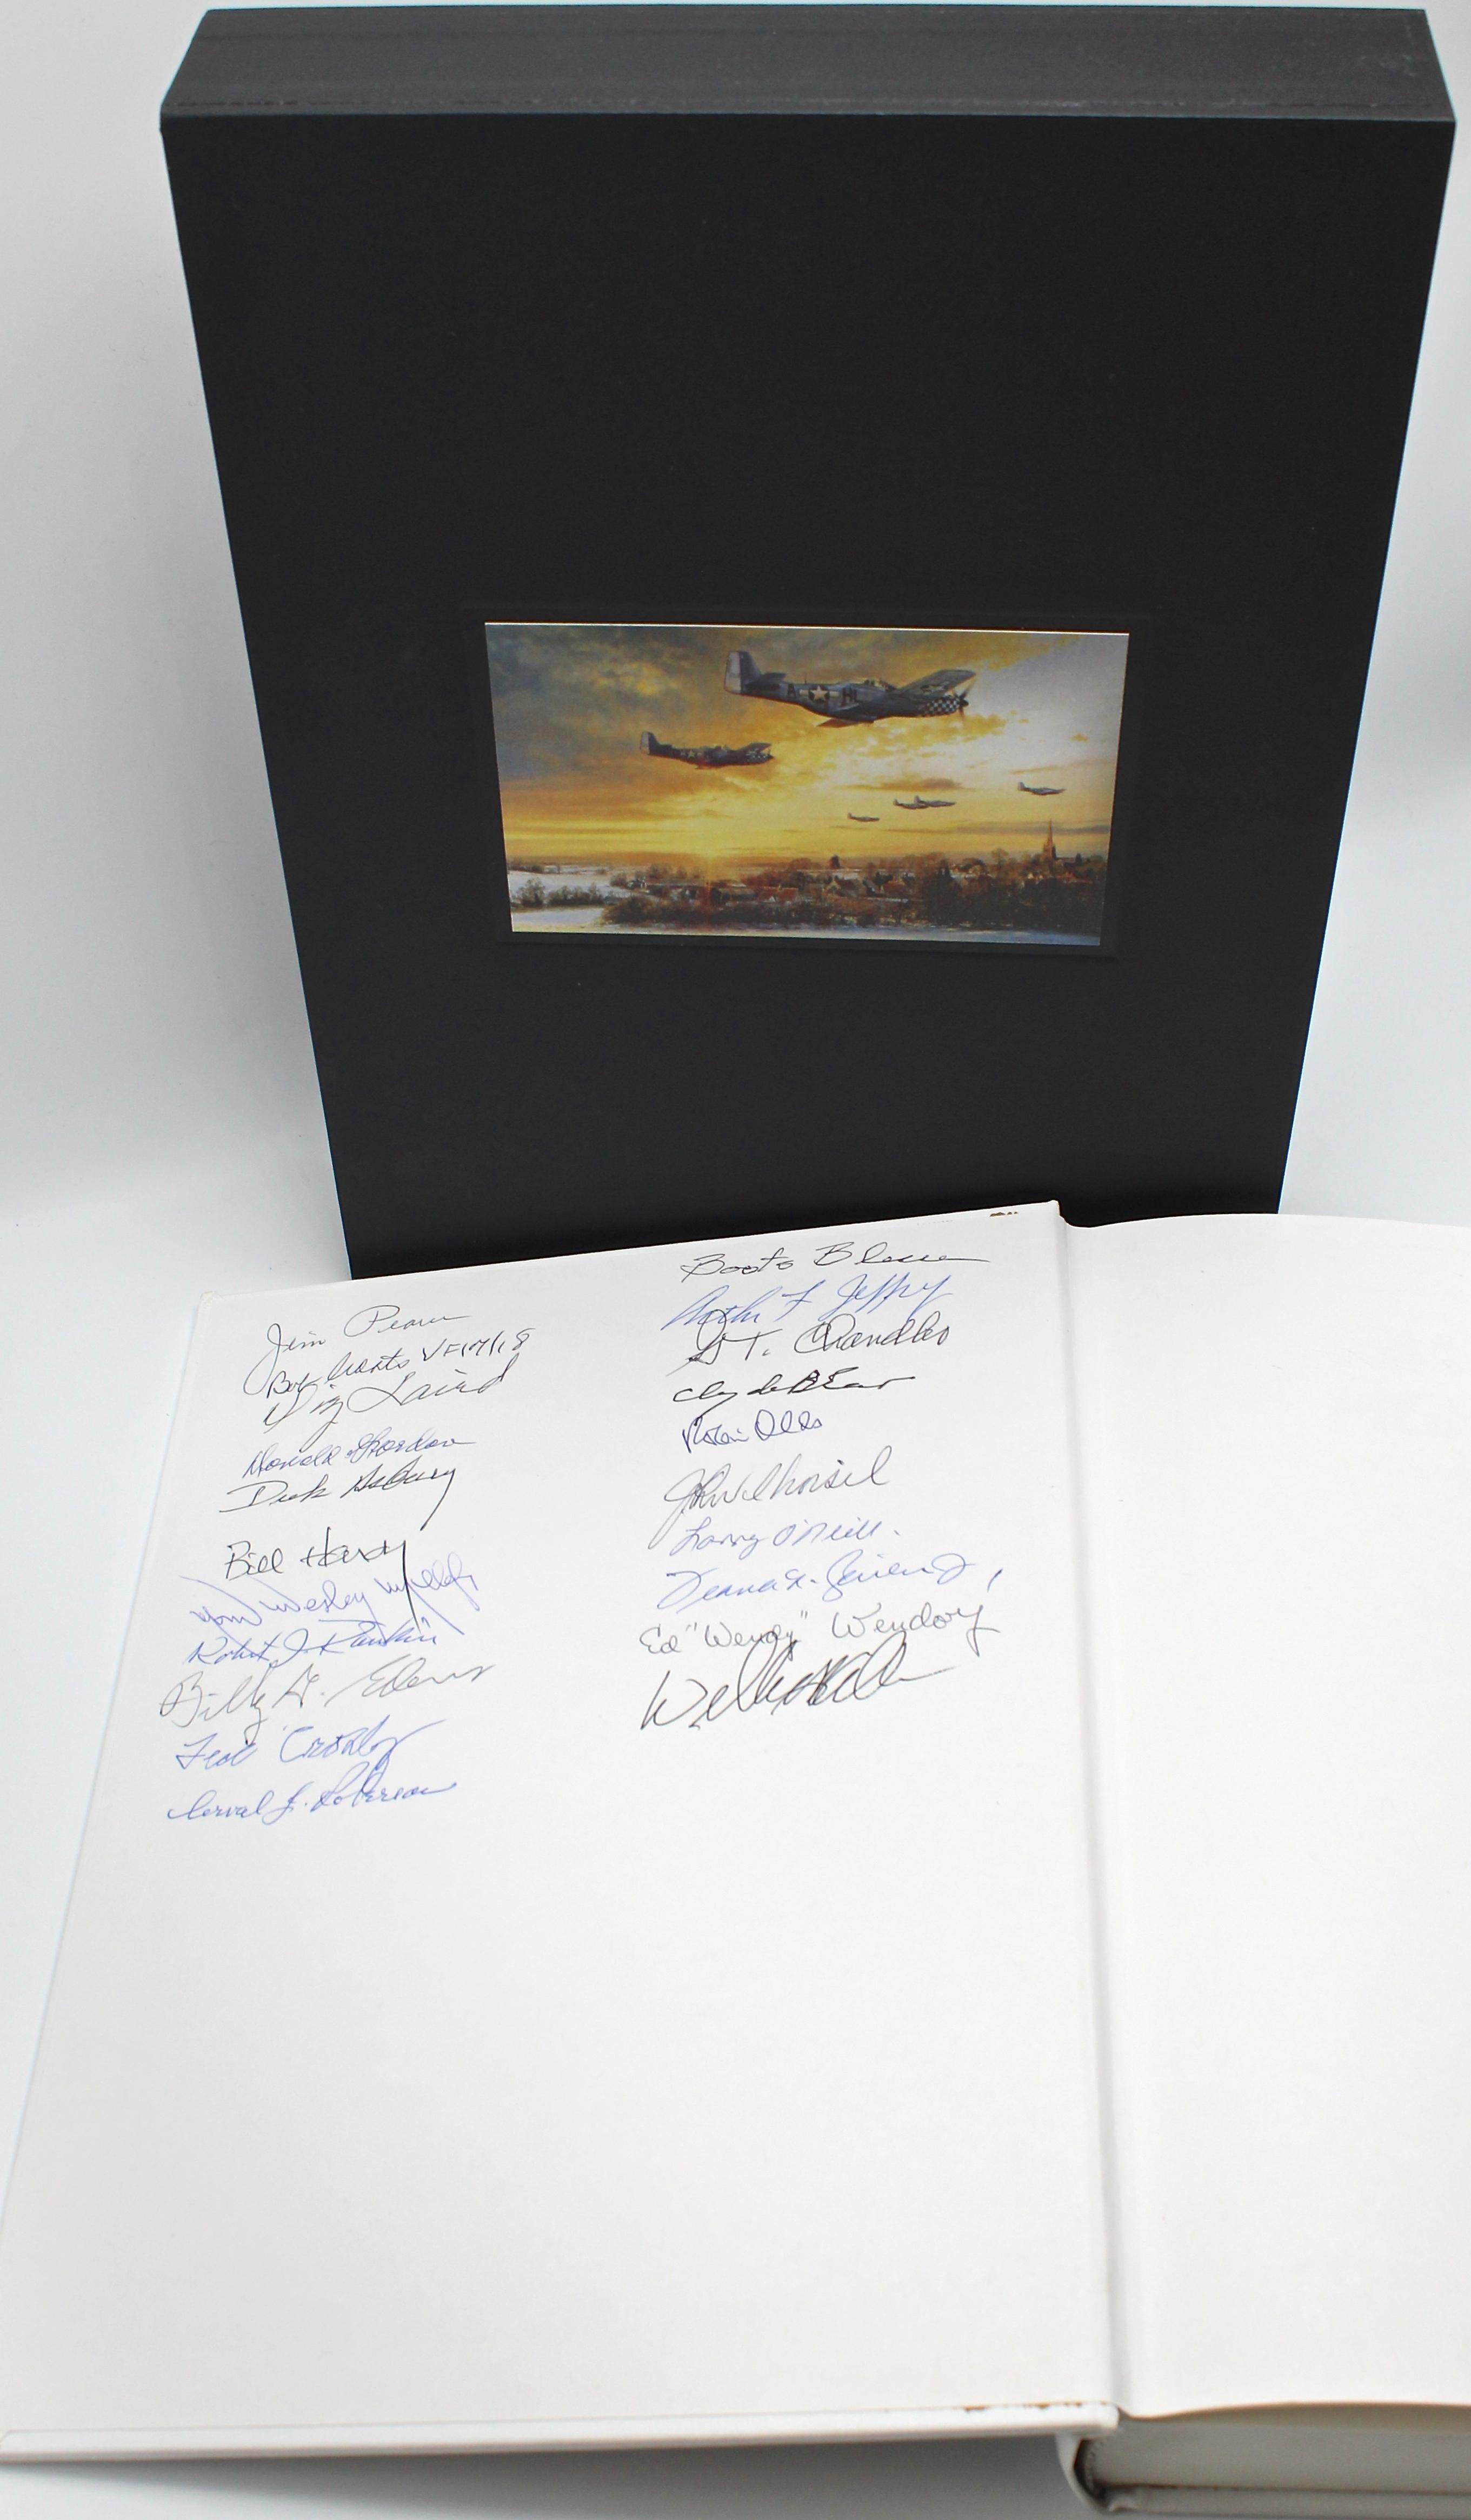 Edited by J. Ward Boyce. American Fighter Aces Album. 2005. Signed by twenty-one fighter pilots. Presented in custom archival slipcase.

This 2005 American Fighter Aces Album includes signatures of all twenty-one fighter pilot “Aces” present at